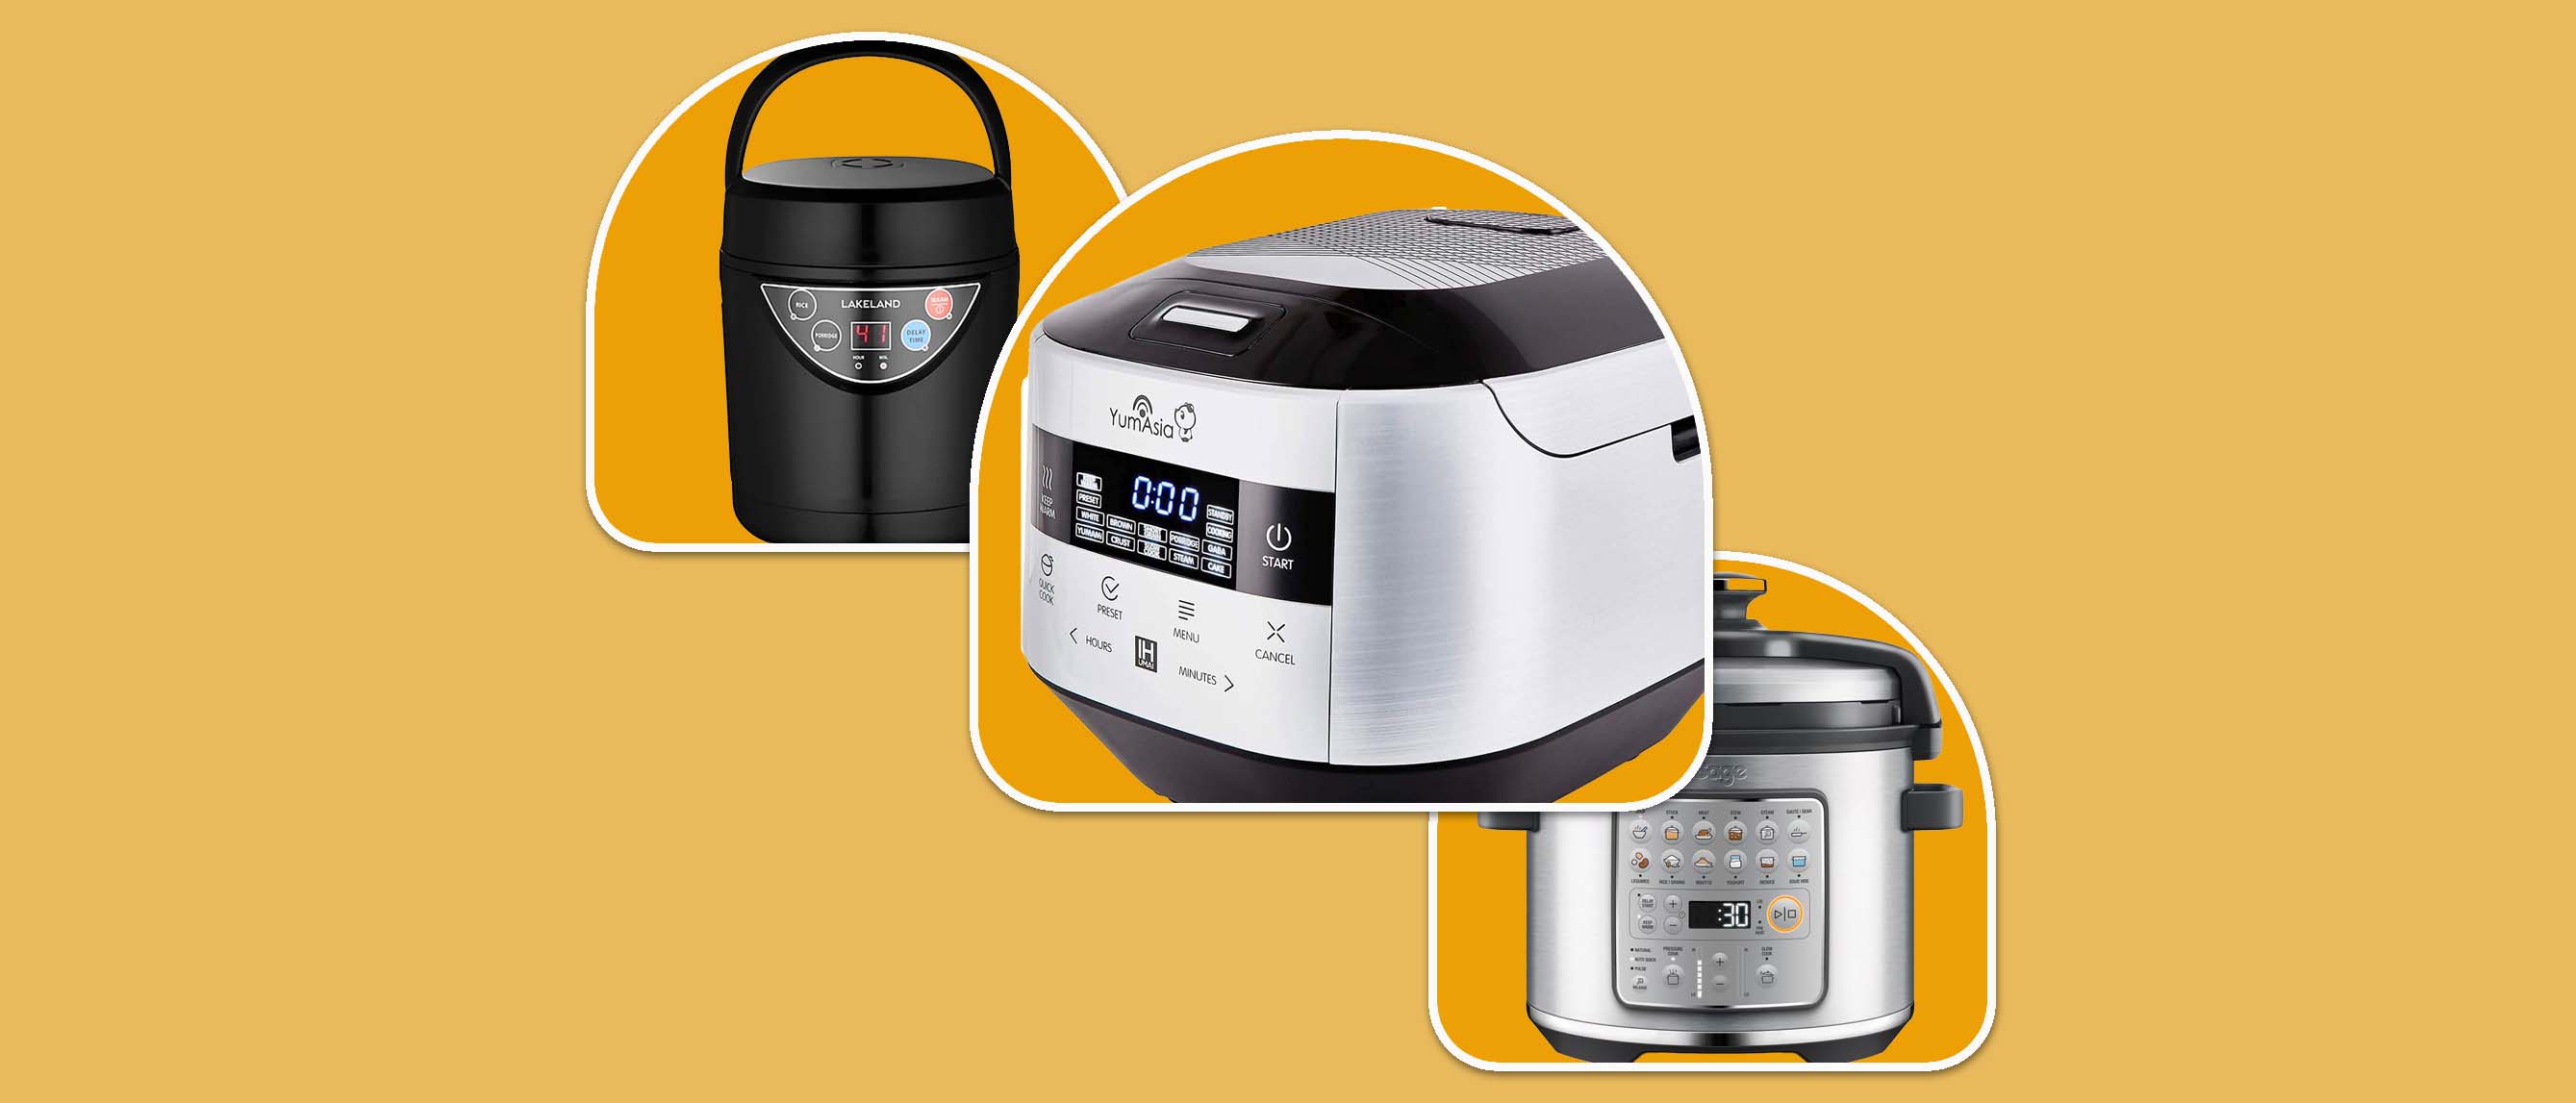 Tips on cooking perfect rice in your Yum Asia rice cooker